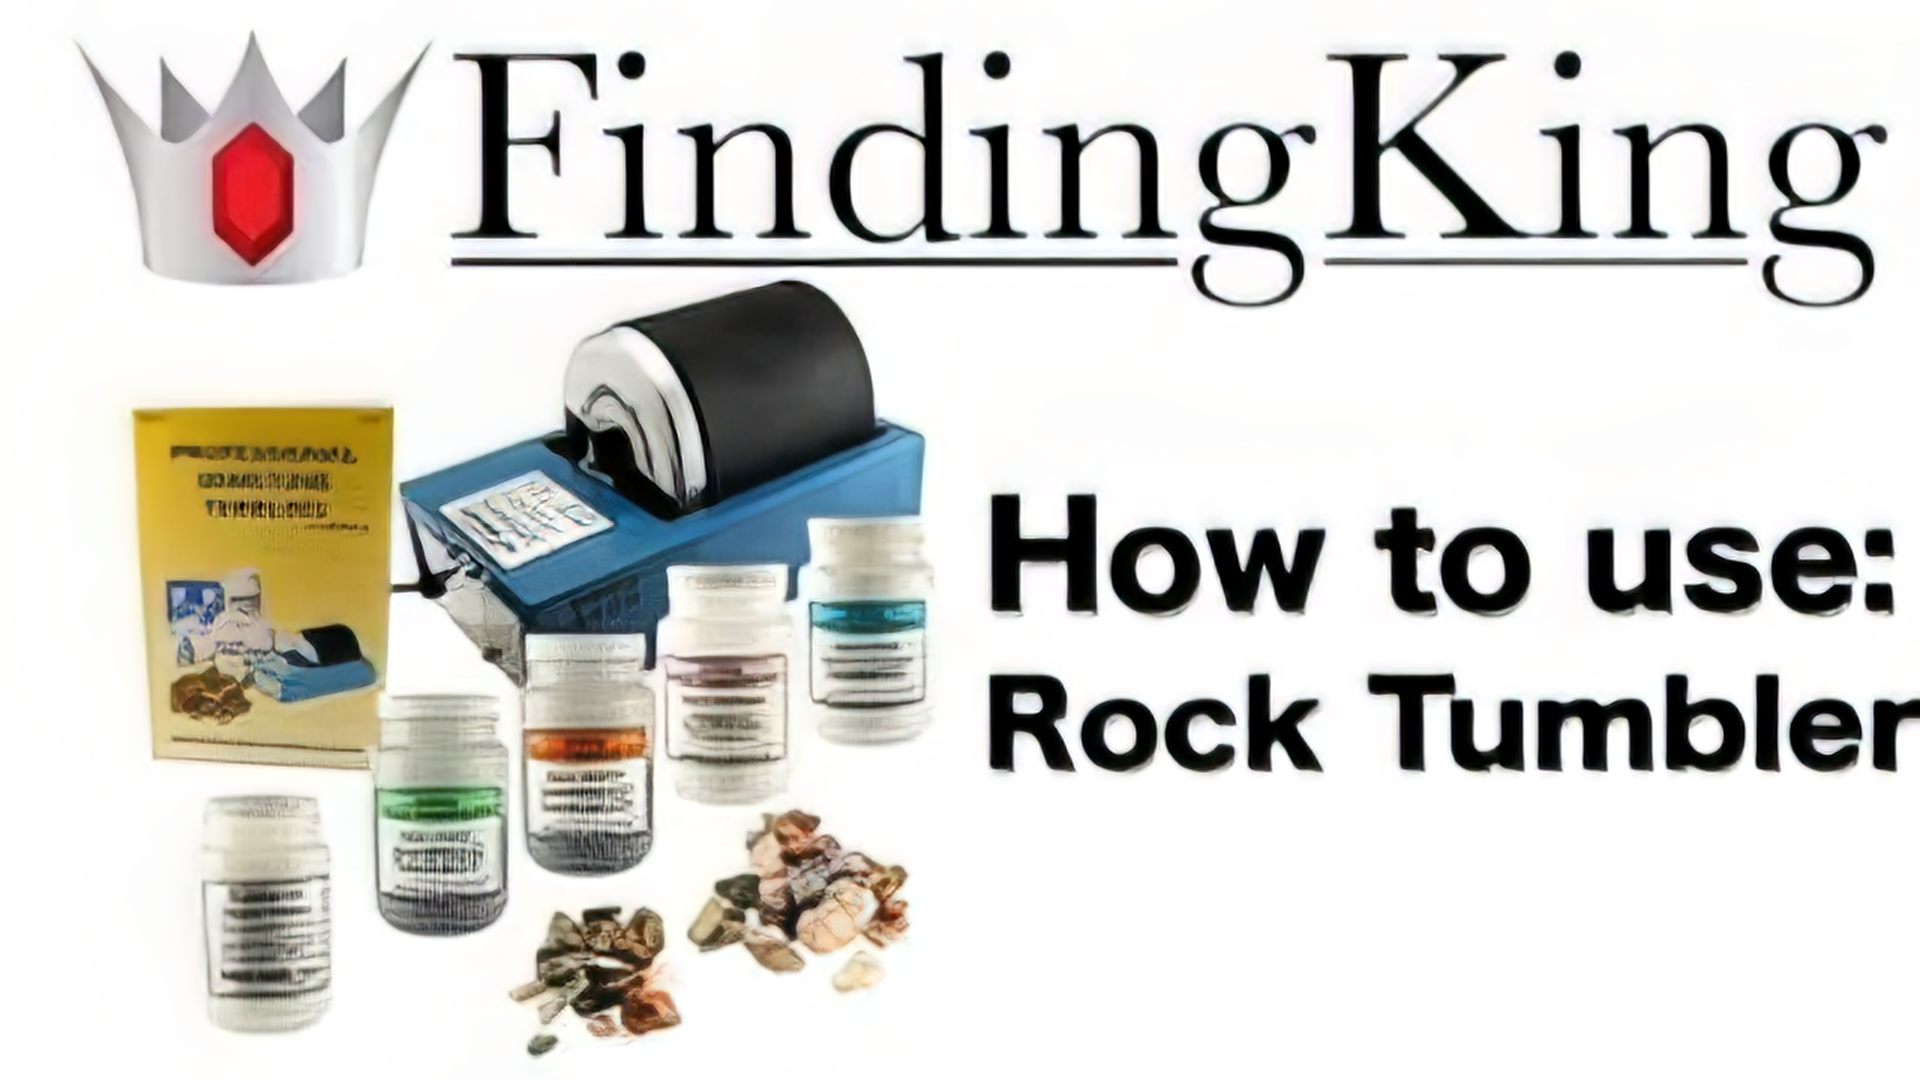 Load video: How to use a rock tumbler to polish rocks.